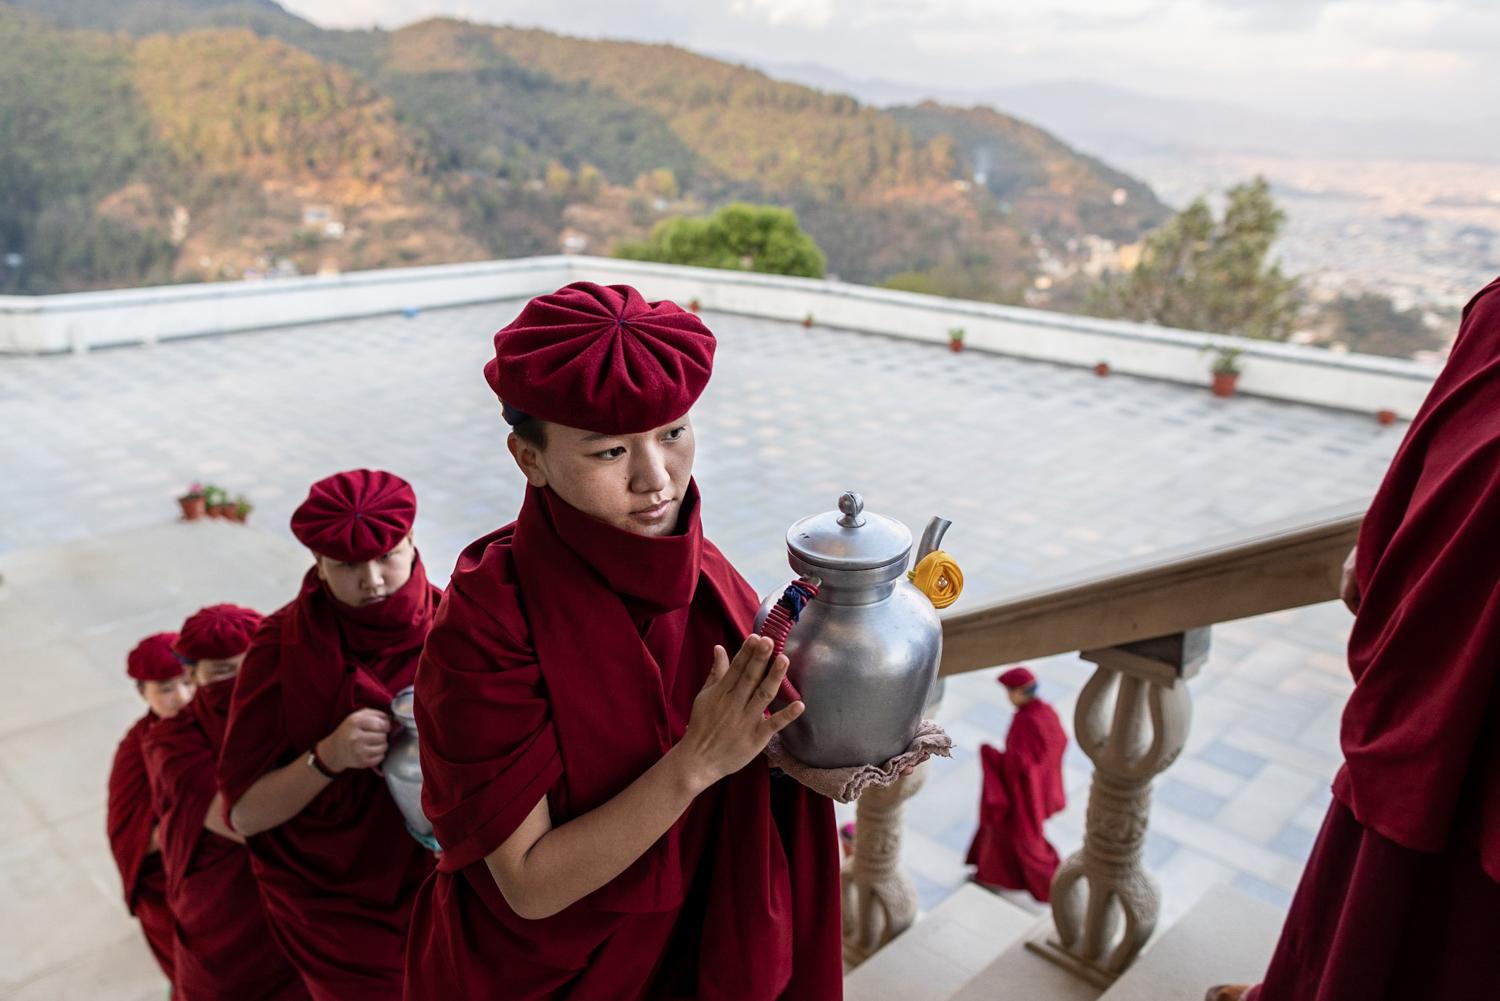 THE KUNG FU NUNS OF THE HIMALAYAS  - Young nuns arrive with tea pots during the evening puja...